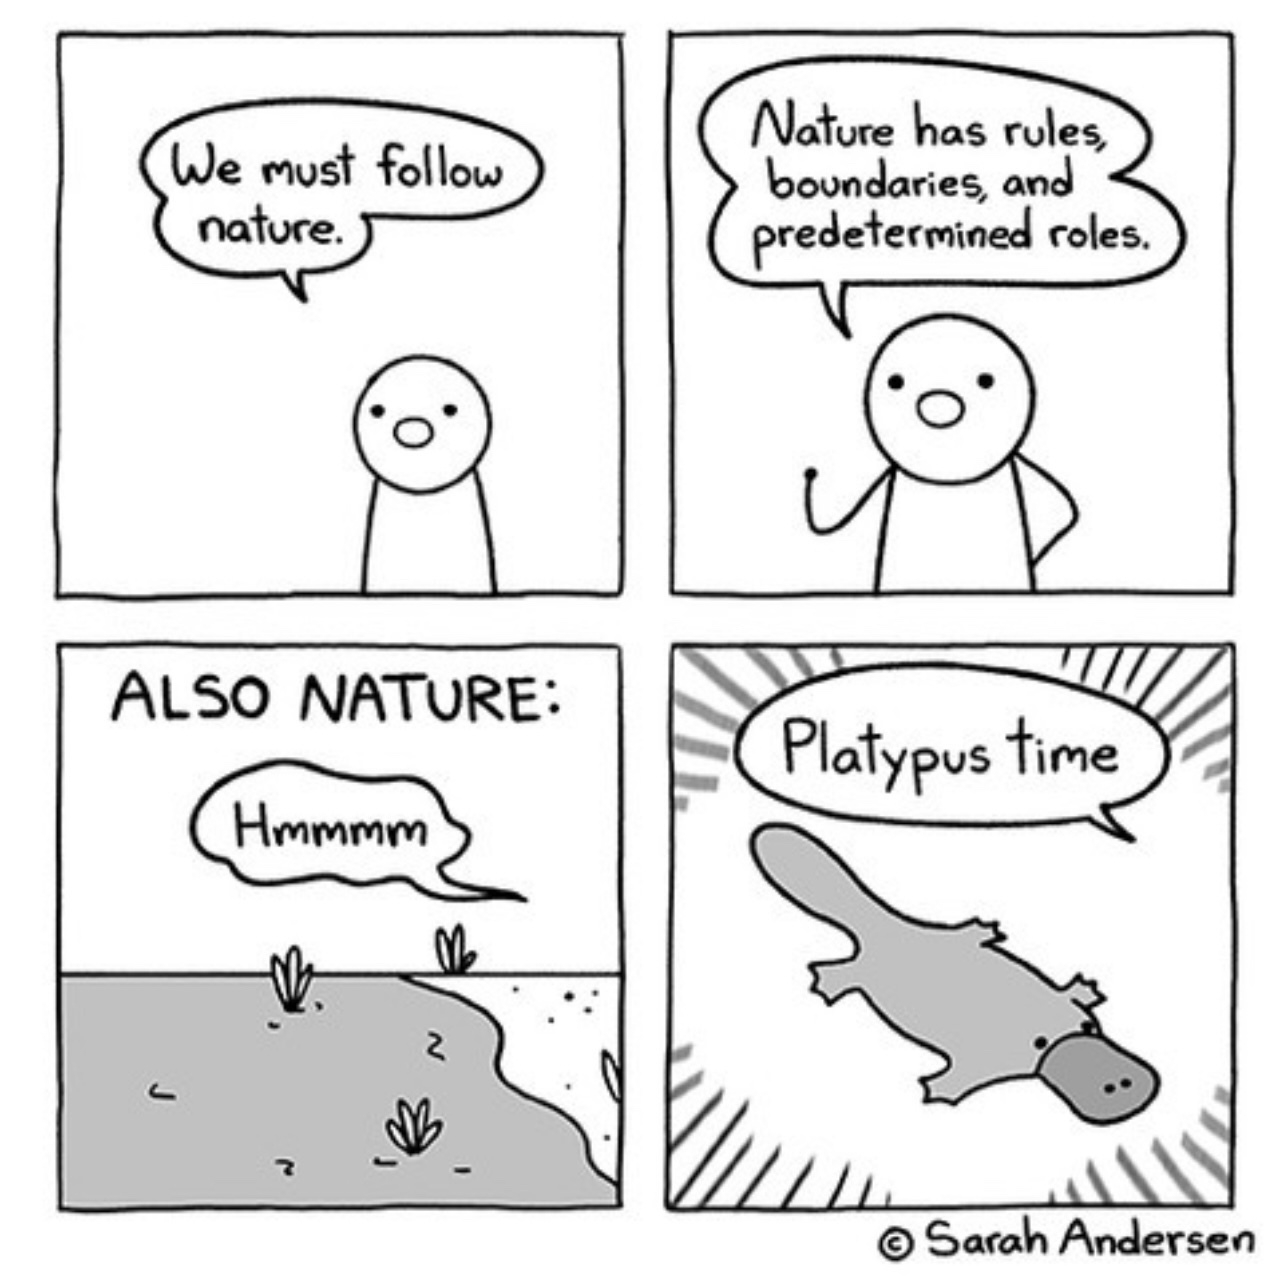 4-pane comic by Sarah Andersen. On the first pane a person says we must follow nature. On the second pane the person expands to say that nature has rules, boundaries, and predetermined roles. On the third pane a beach can be seen, and a thought bubble attributed to nature thinks hmmmm…. On the last pane a the title says Platypus time and a Platypus can be seen from the top down. 